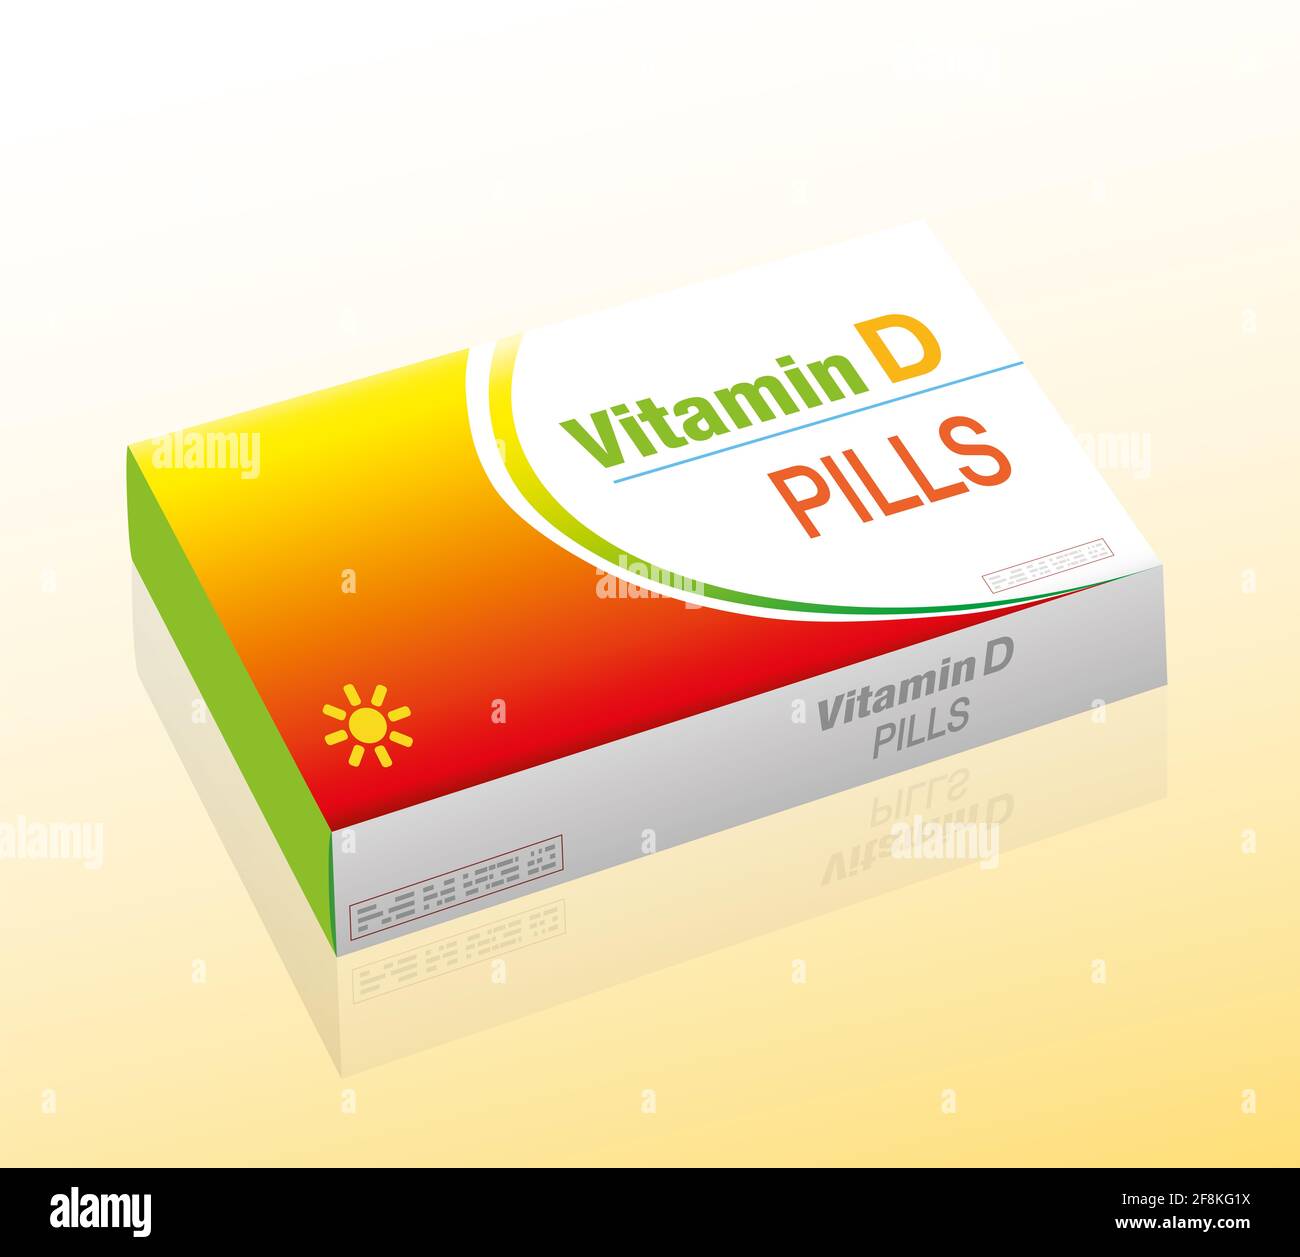 Vitamin D pills, as a supplement to healthy diet, medical dummy packet with tablets that prevent vitamin D deficiency, illustration, white background. Stock Photo